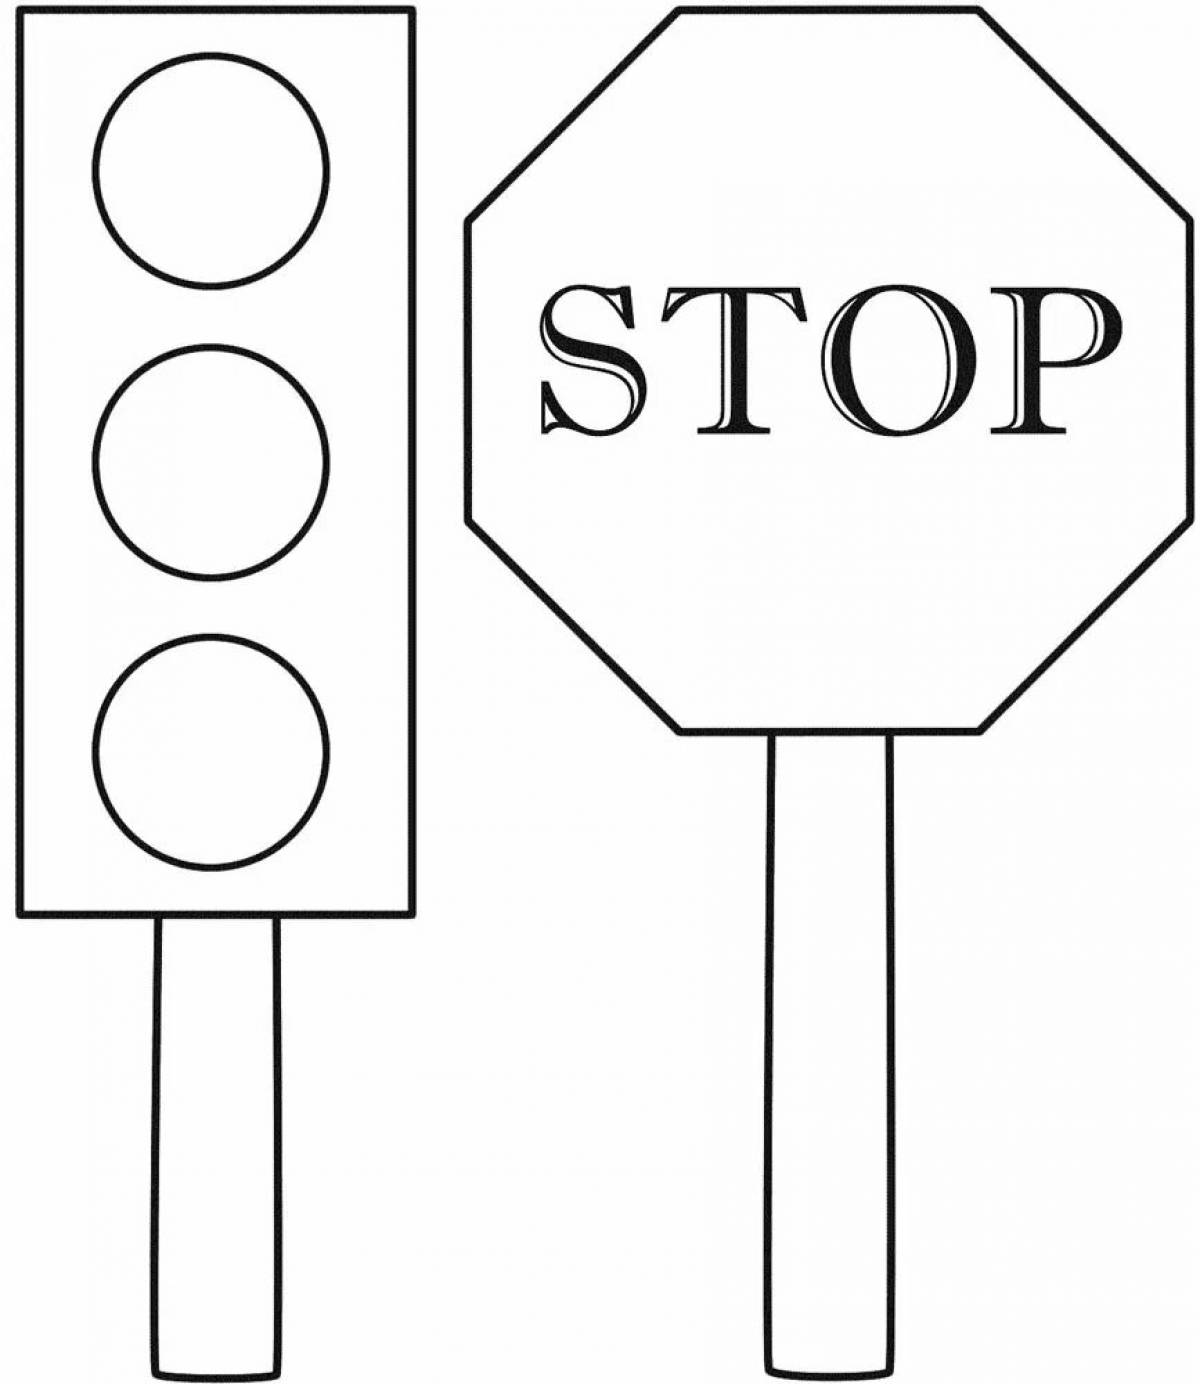 Traffic signs for preschool children according to traffic rules #5